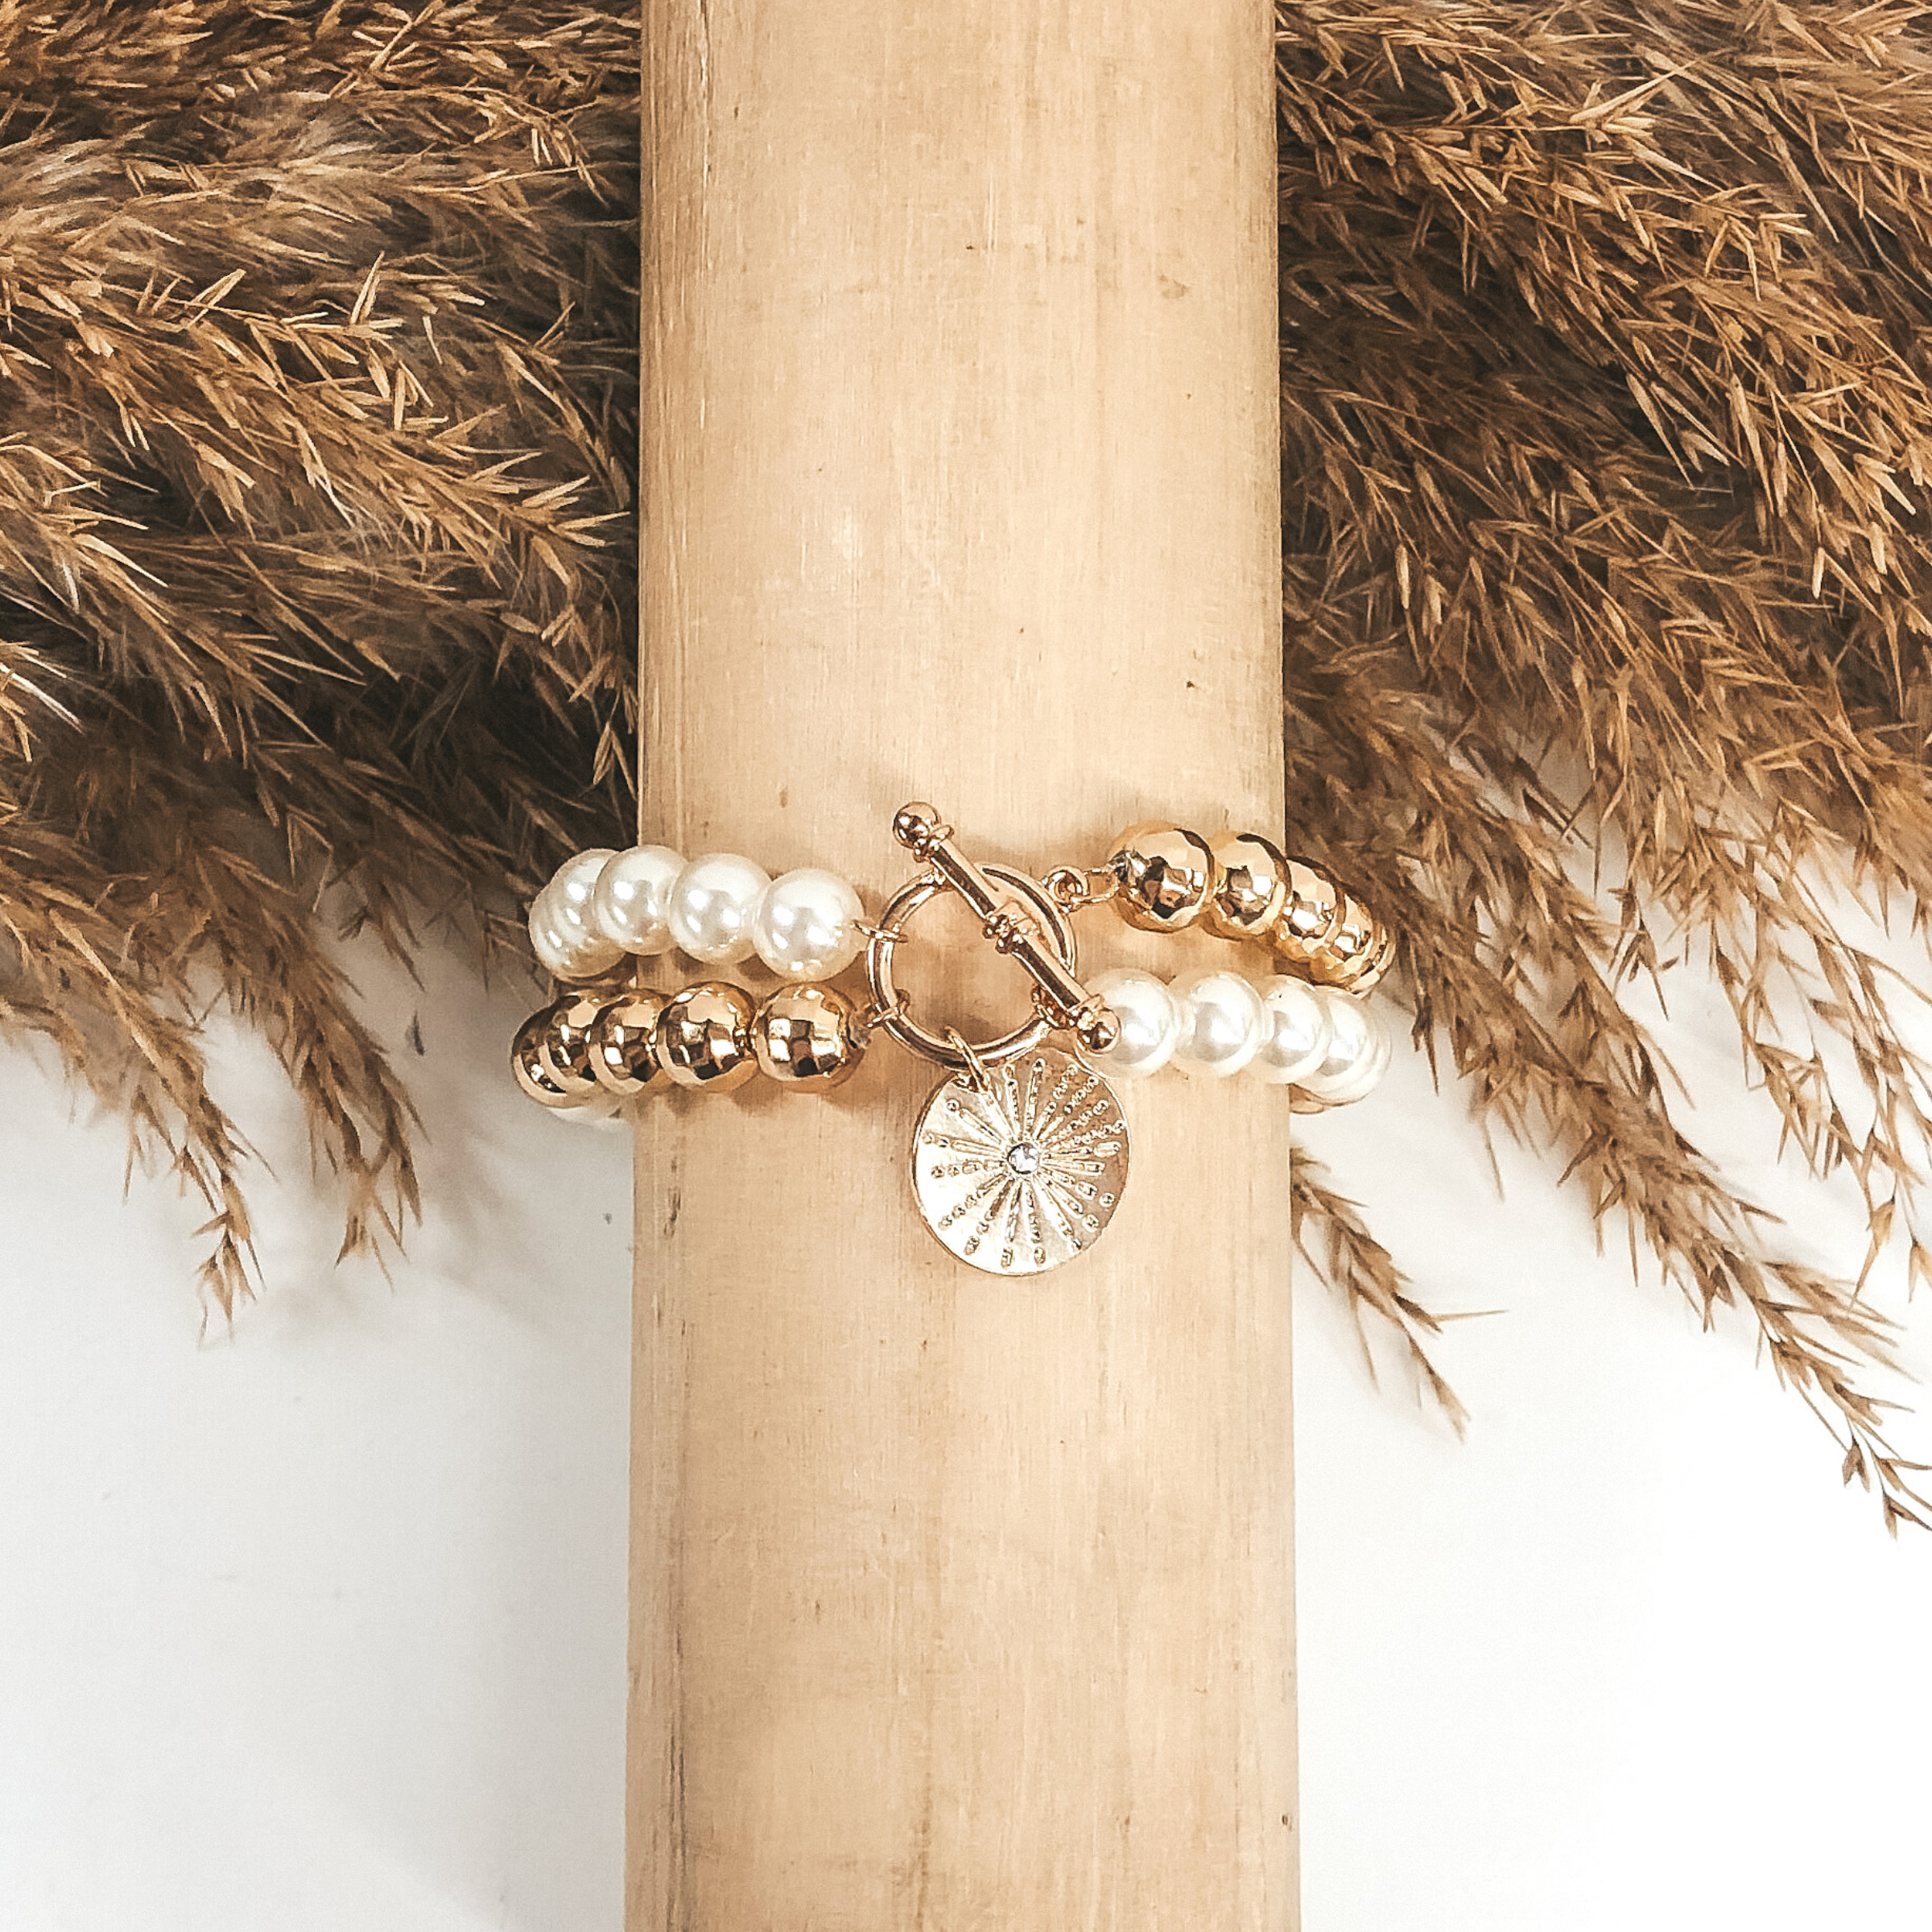 This is a two stranded bracelet that includes segments of gold or white beads connect with a toggle clasp. There is a gold circle pendant with a little sun design and a tiny center crystal. This bracelet is pictured wrapped on a wooden bracelet holder on a white background with tan floral in the top half of the picture.